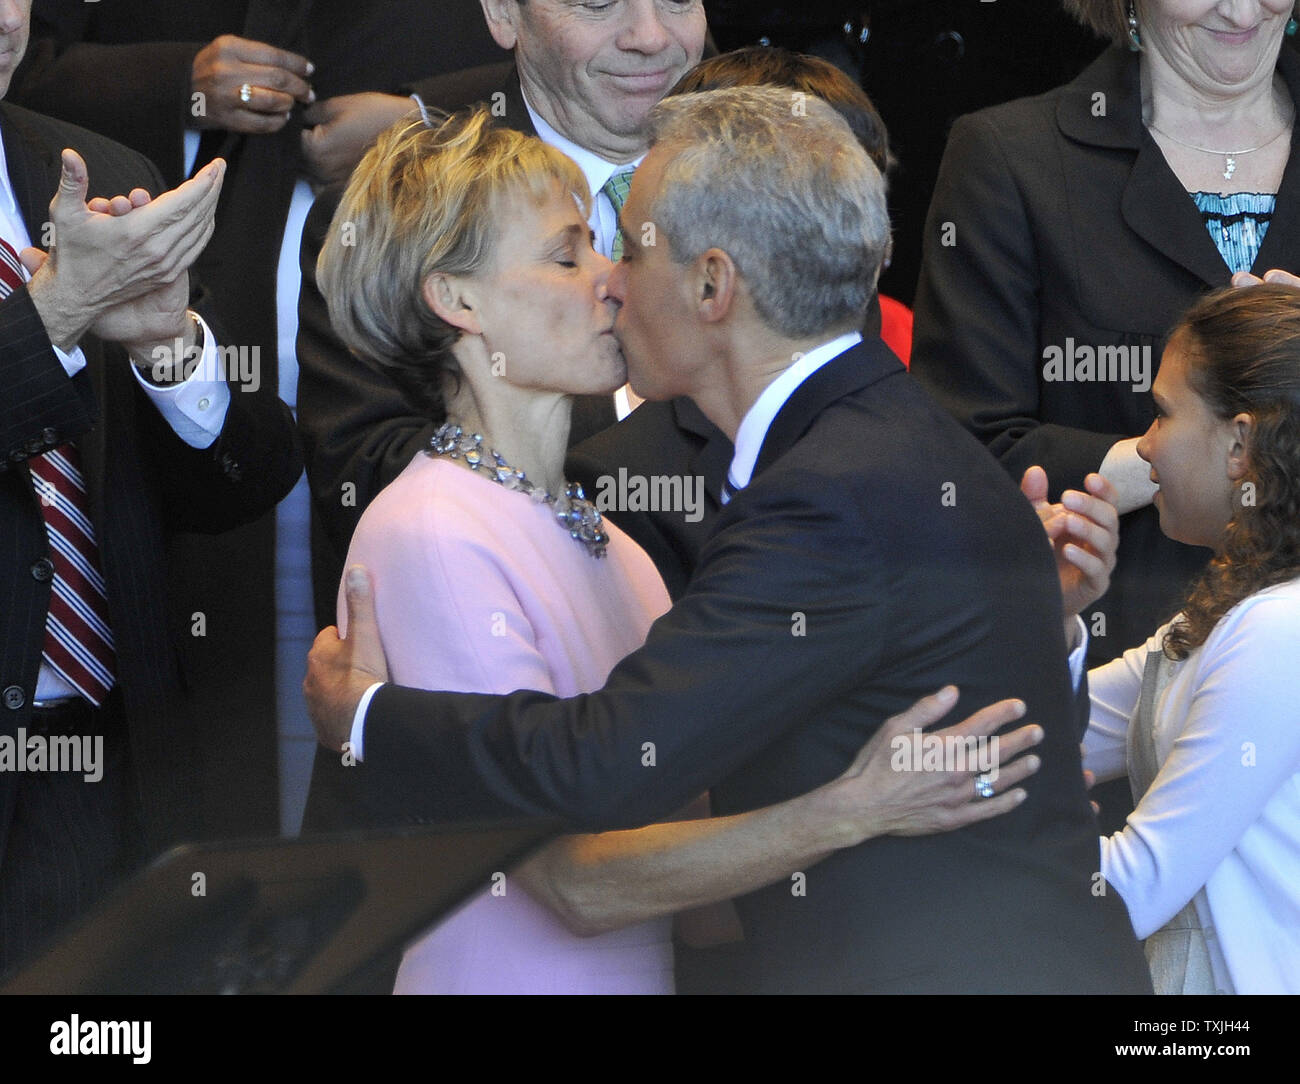 Rahm Emanuel (R) kisses his wife Amy Rule after taking the oath of office as mayor of Chicago during an in inaugural ceremony at Millennium Park on May 16, 2011. Emanuel takes over for Richard M. Daley, who had served in the post since 1989.     UPI/Brian Kersey Stock Photo